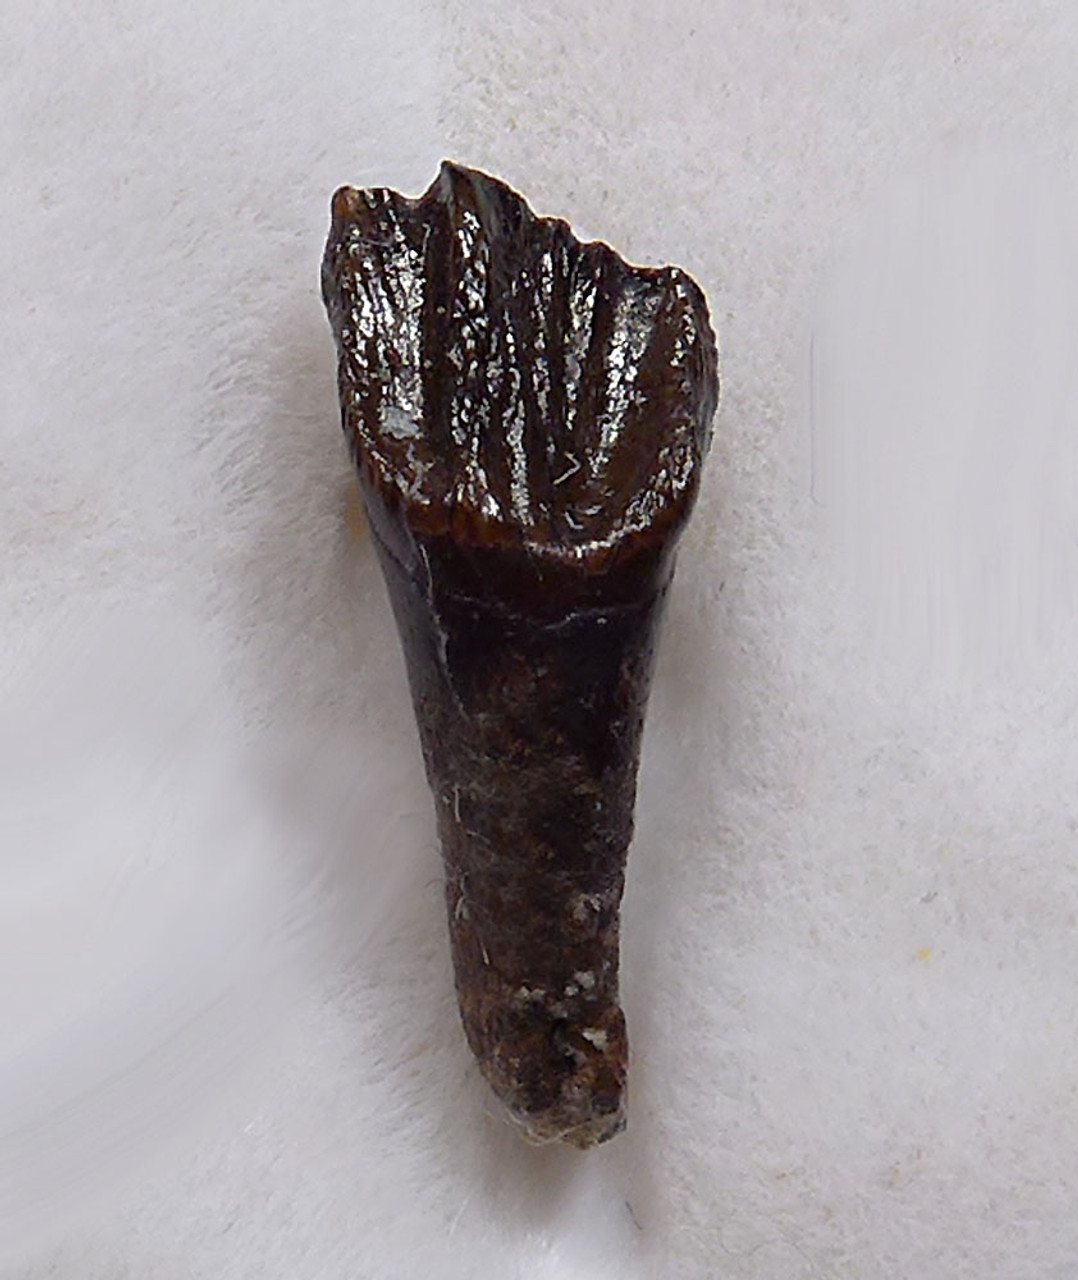 EXTREMELY RARE ROOTED BABY LEPTOCERATOPS TOOTH FROM A NEWLY HATCHED DINOSAUR  *DT19-034